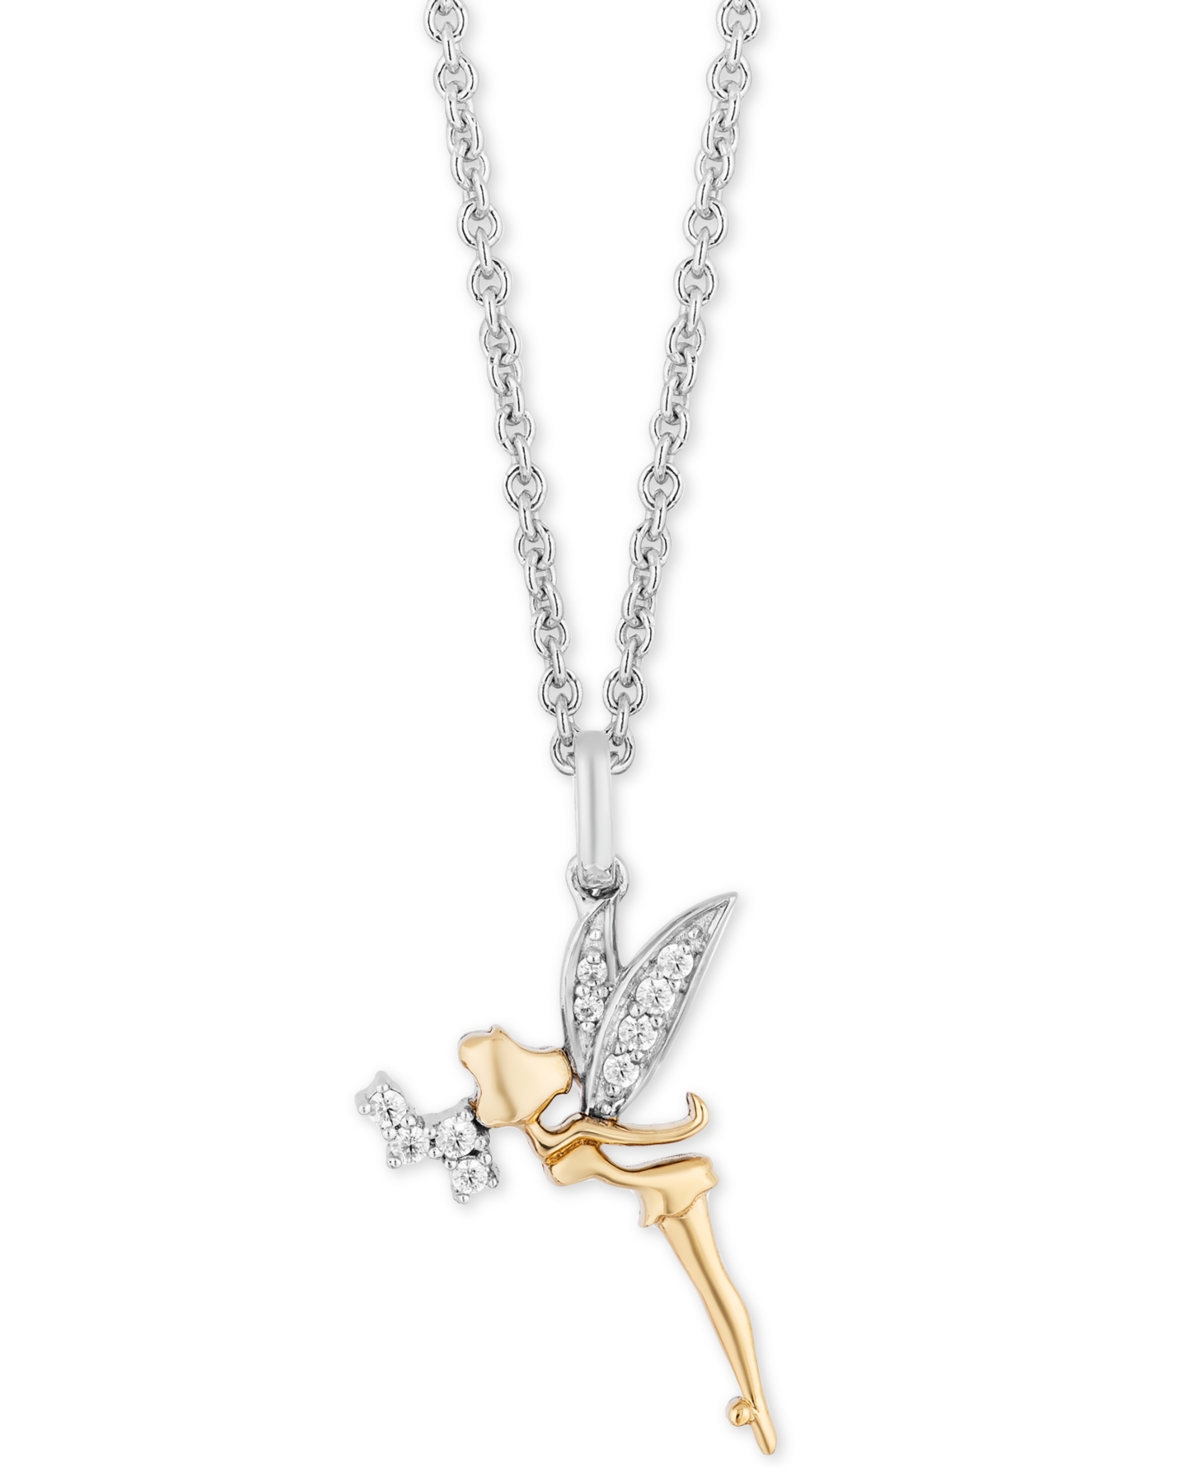 Enchanted Disney Fine Jewelry Enchanted Disney Diamond Tinkerbell Pendant Necklace (1/10 ct. t.w.) in Sterling Silver and 14k Gold, 16" + 2" Extender